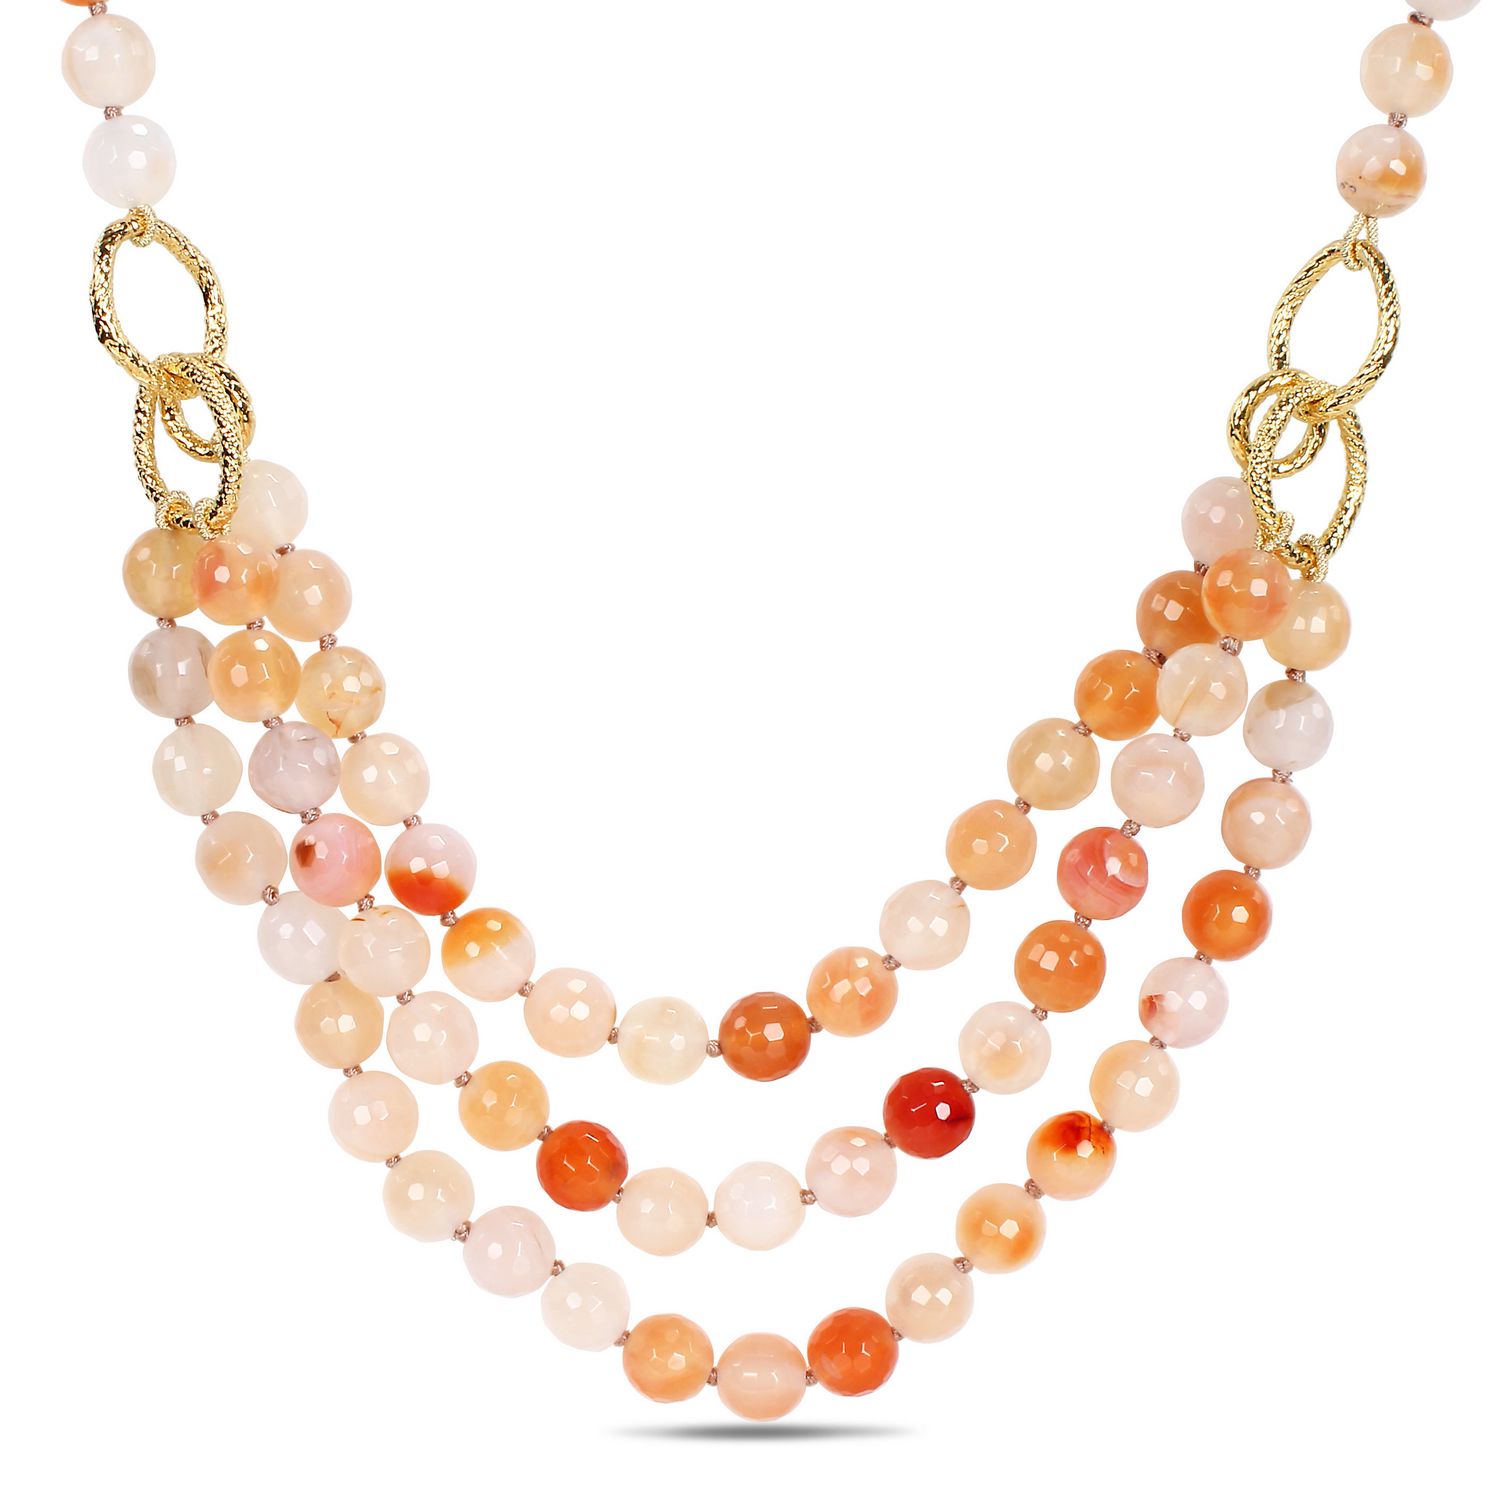 Tangelo Faceted Peach Agate Goldtone 3-Strand Beaded Necklace, 18 ...